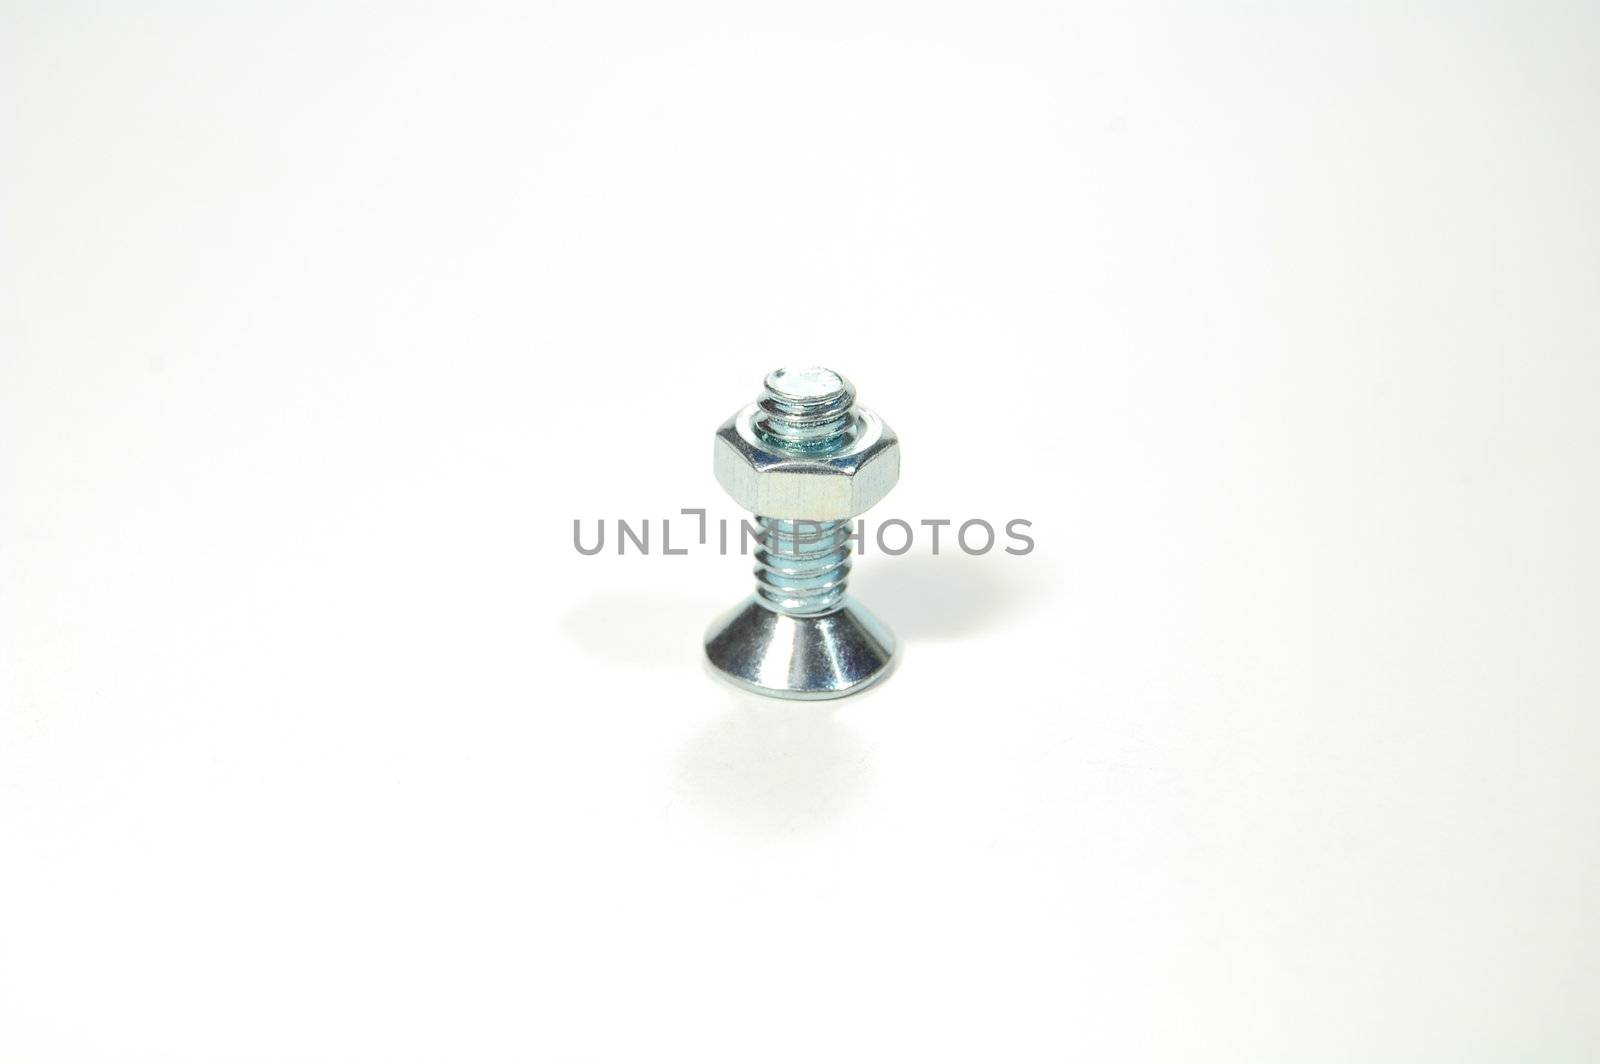 A set of shiny metal nut and bolt for do-it-yourself stuff or repairing/replacing old parts